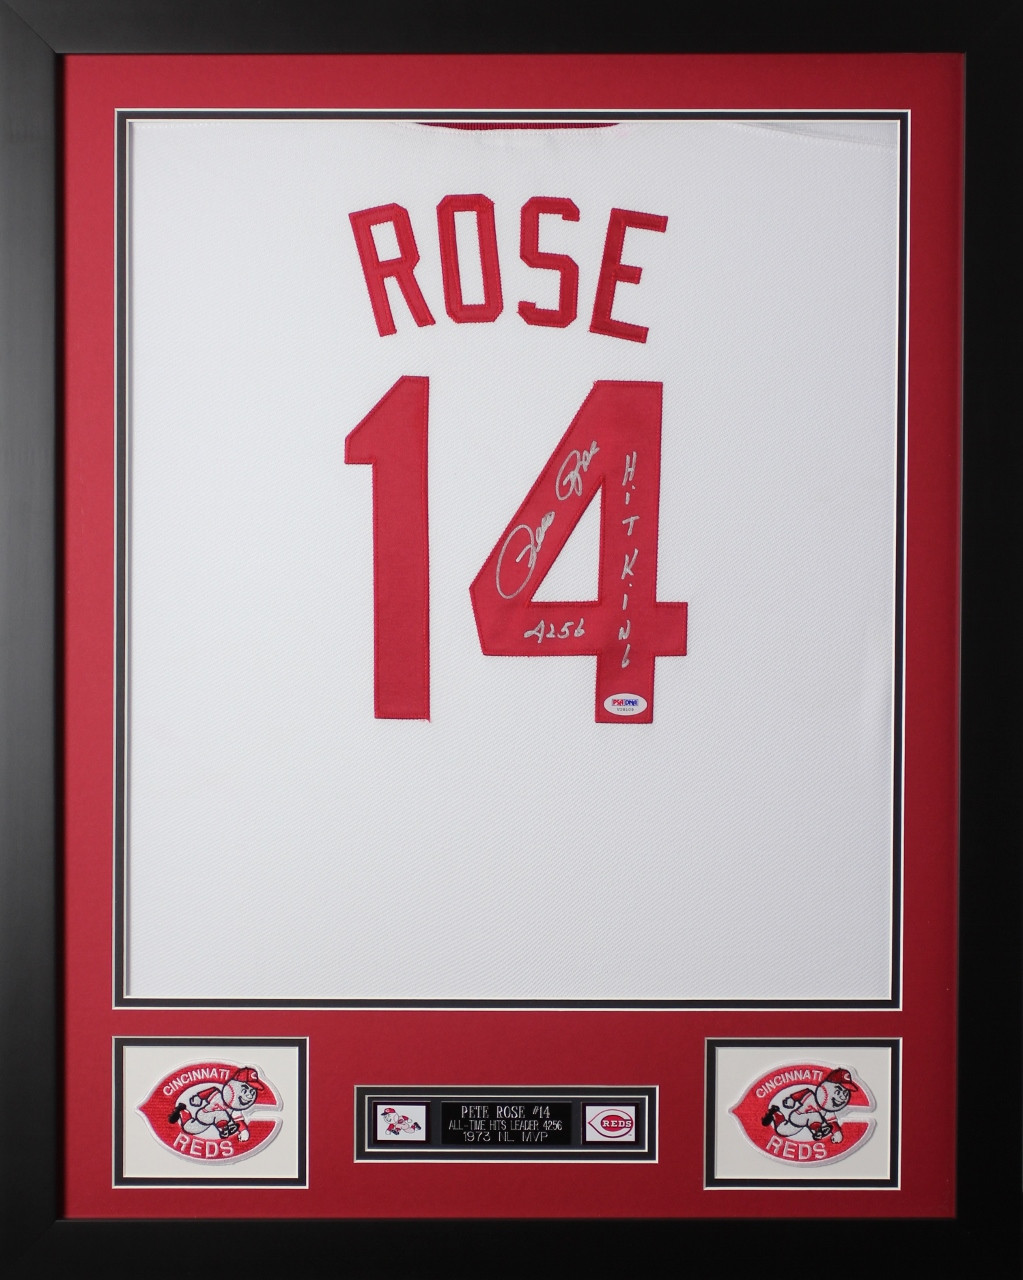 Pete Rose Autographed and Framed White Reds Jersey